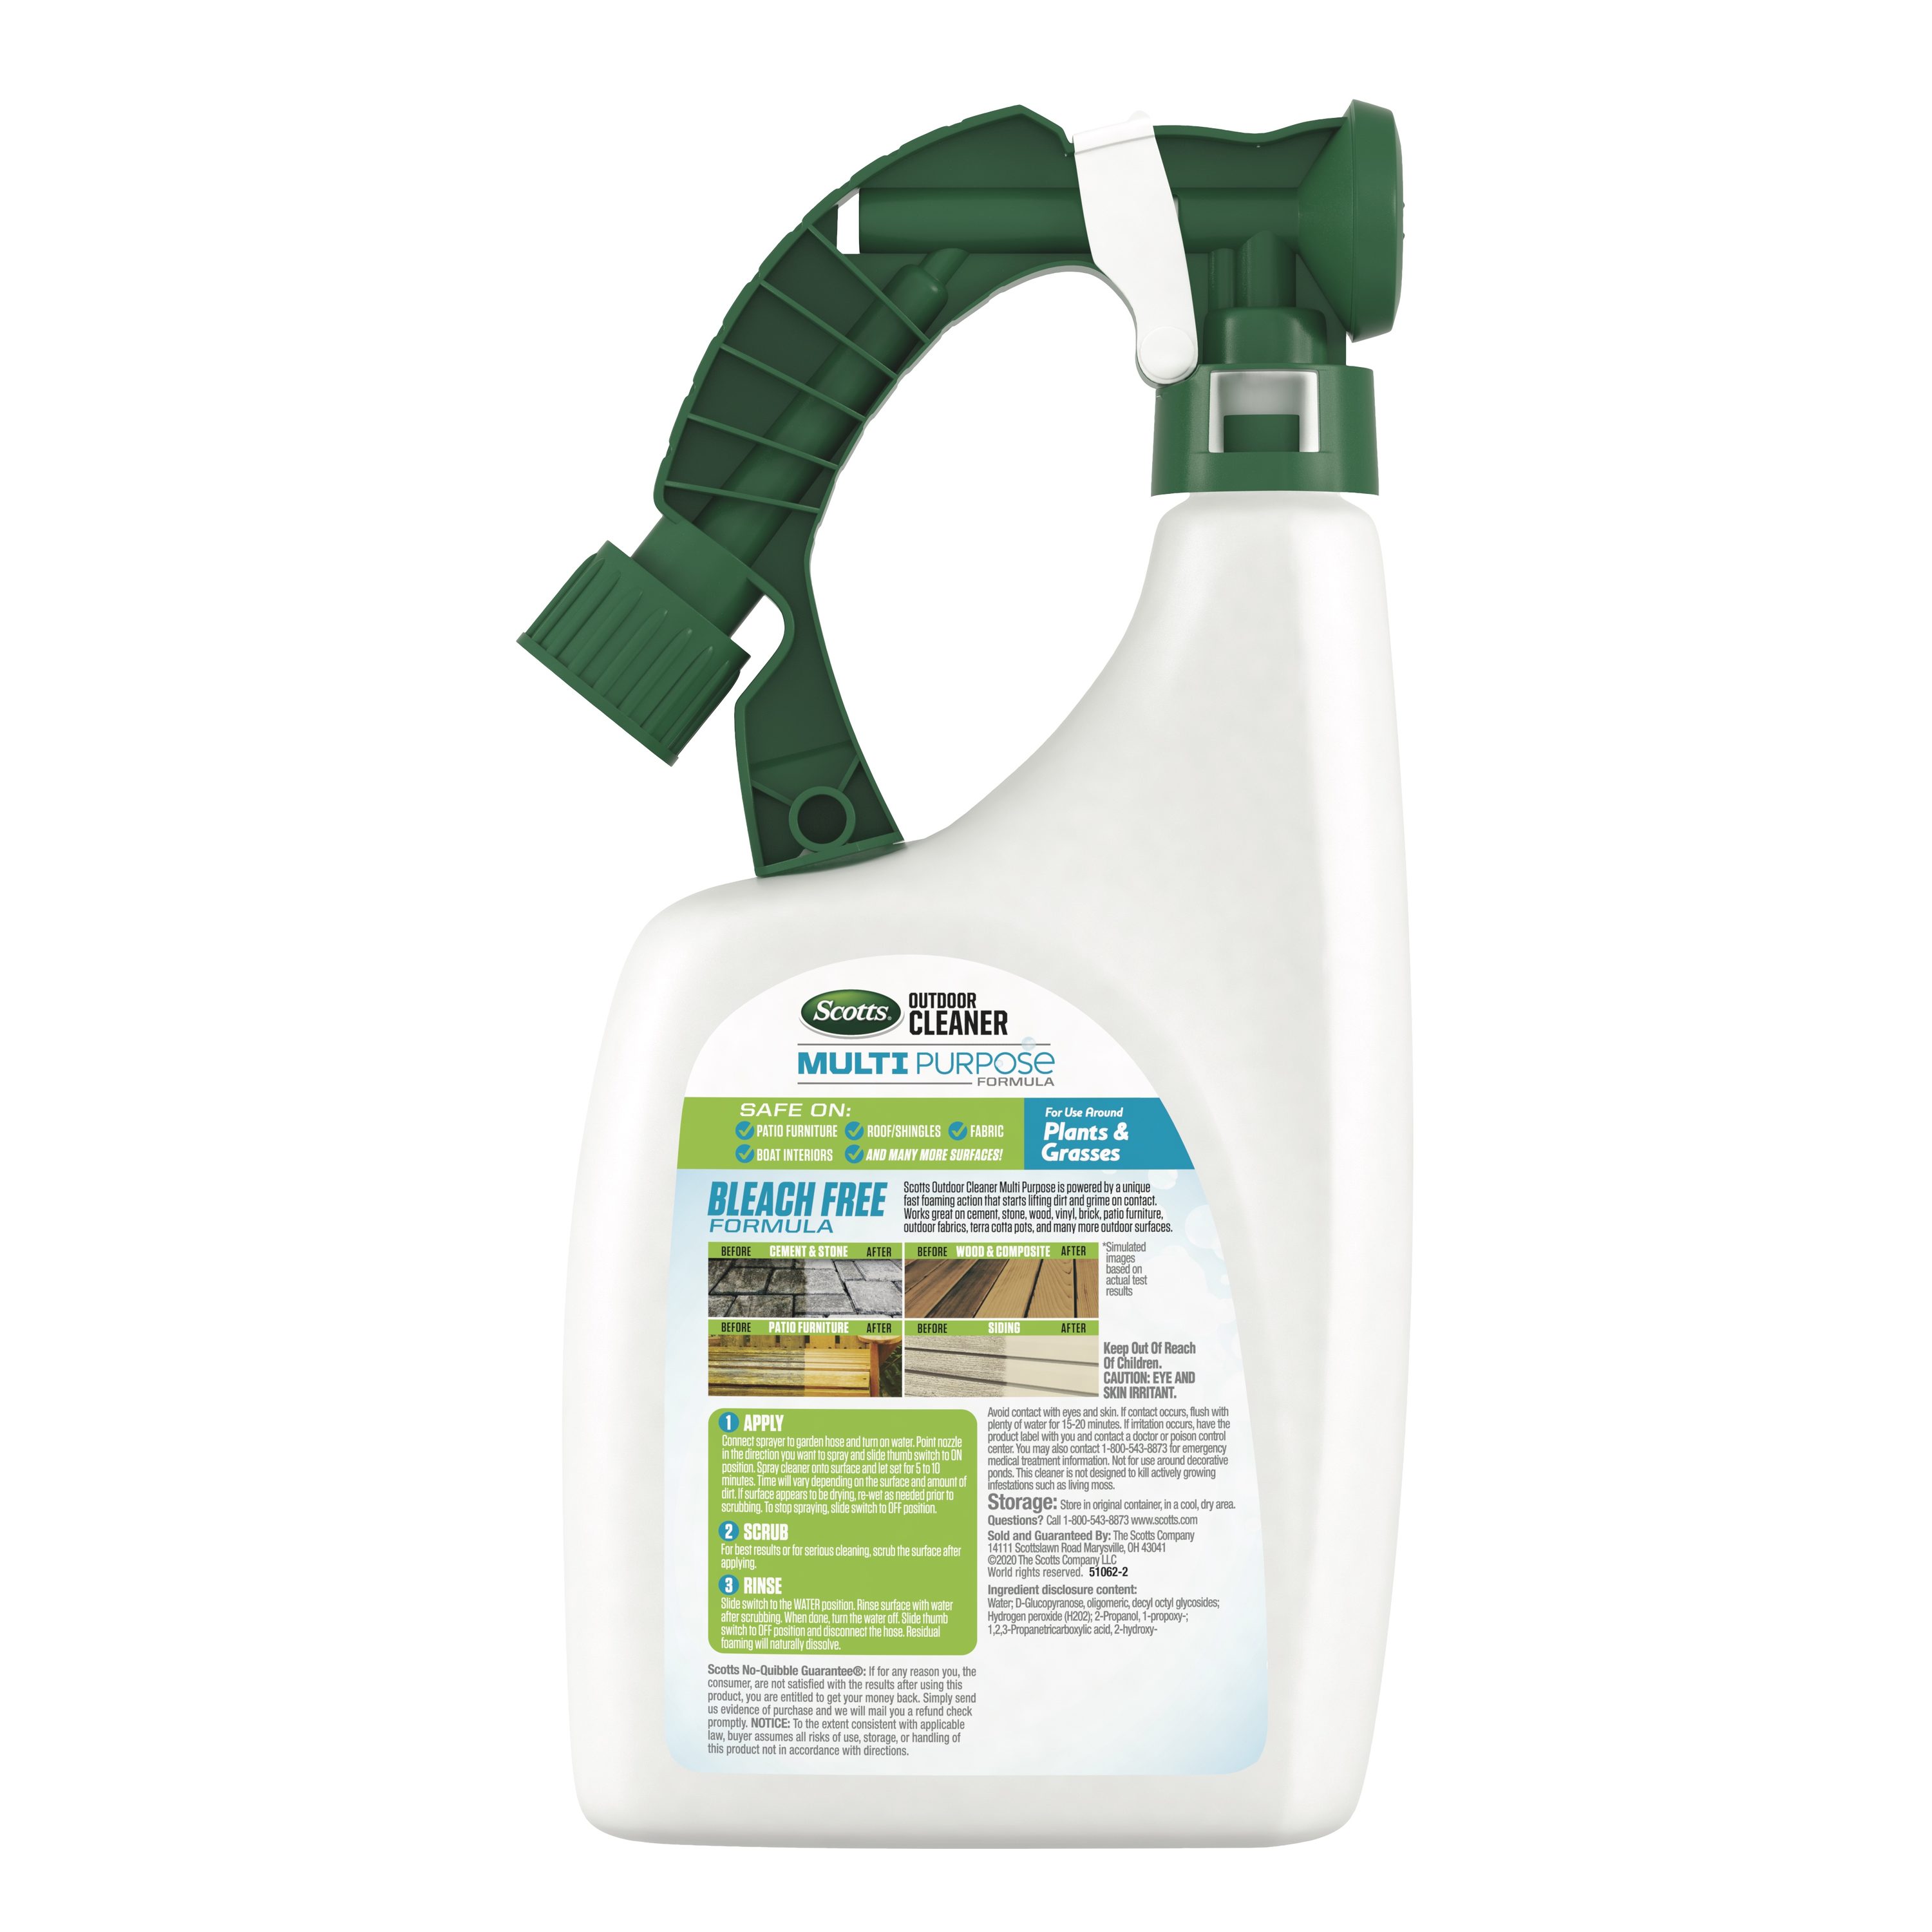 Outdoor Cleaner + OxiClean, 32-oz. Spray